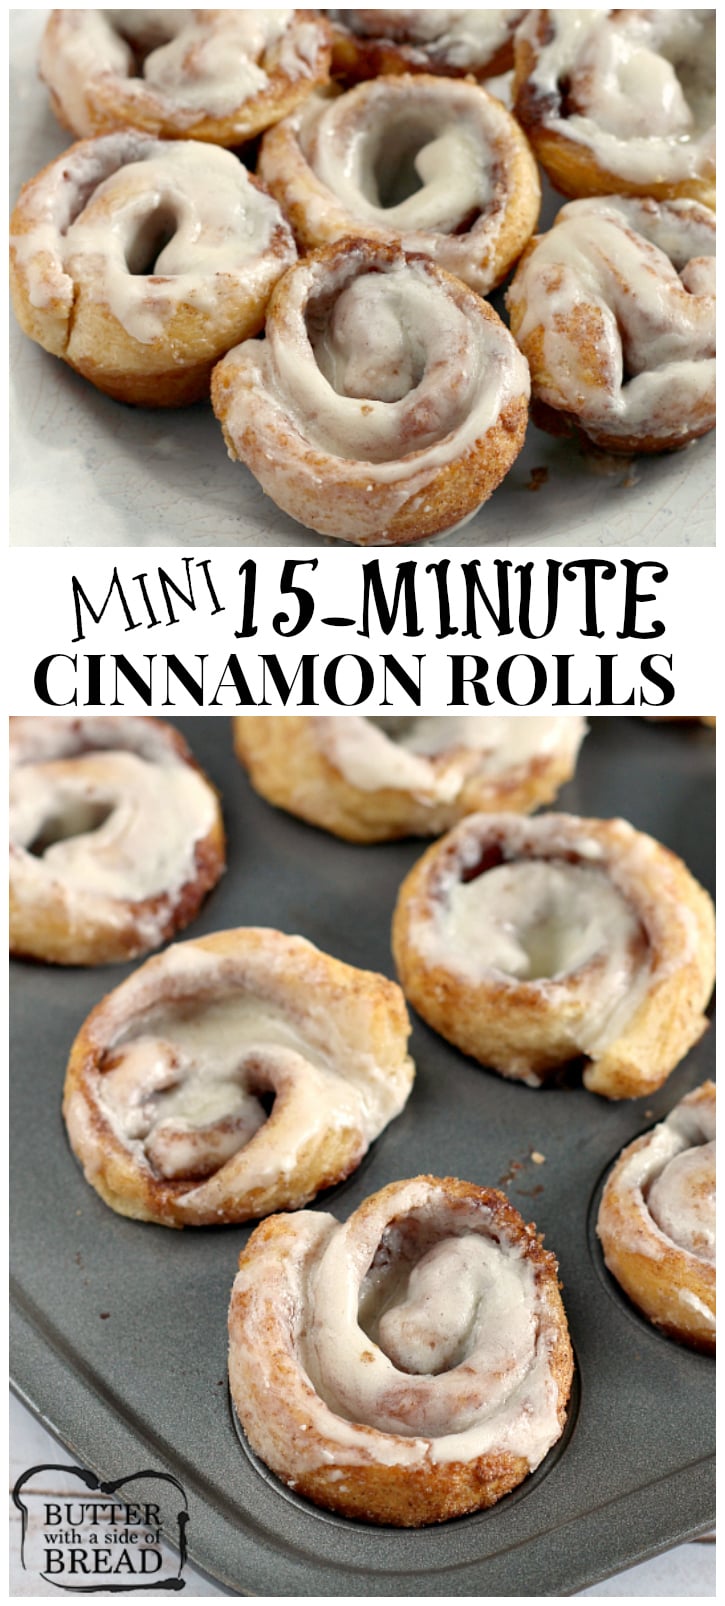 Mini 15-Minute Cinnamon Rolls are so much quicker (and cuter!) than traditional from-scratch cinnamon rolls, and they are delicious too!